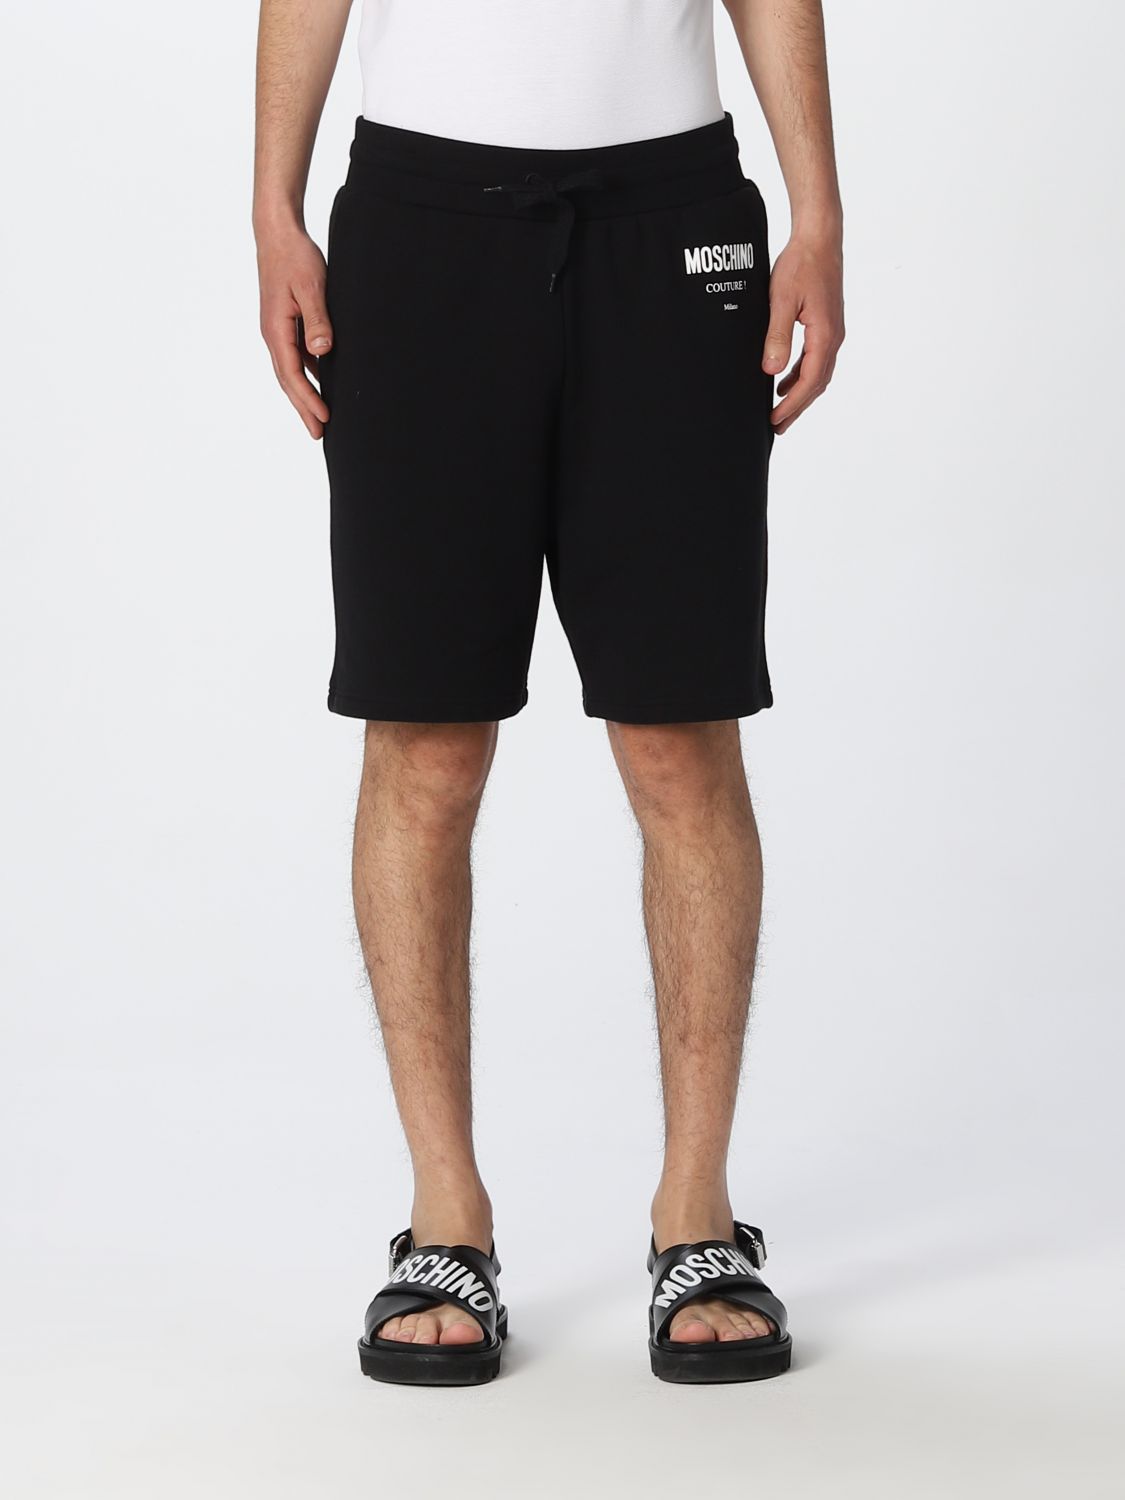 Short Moschino Couture: Moschino Couture men's pants black 1